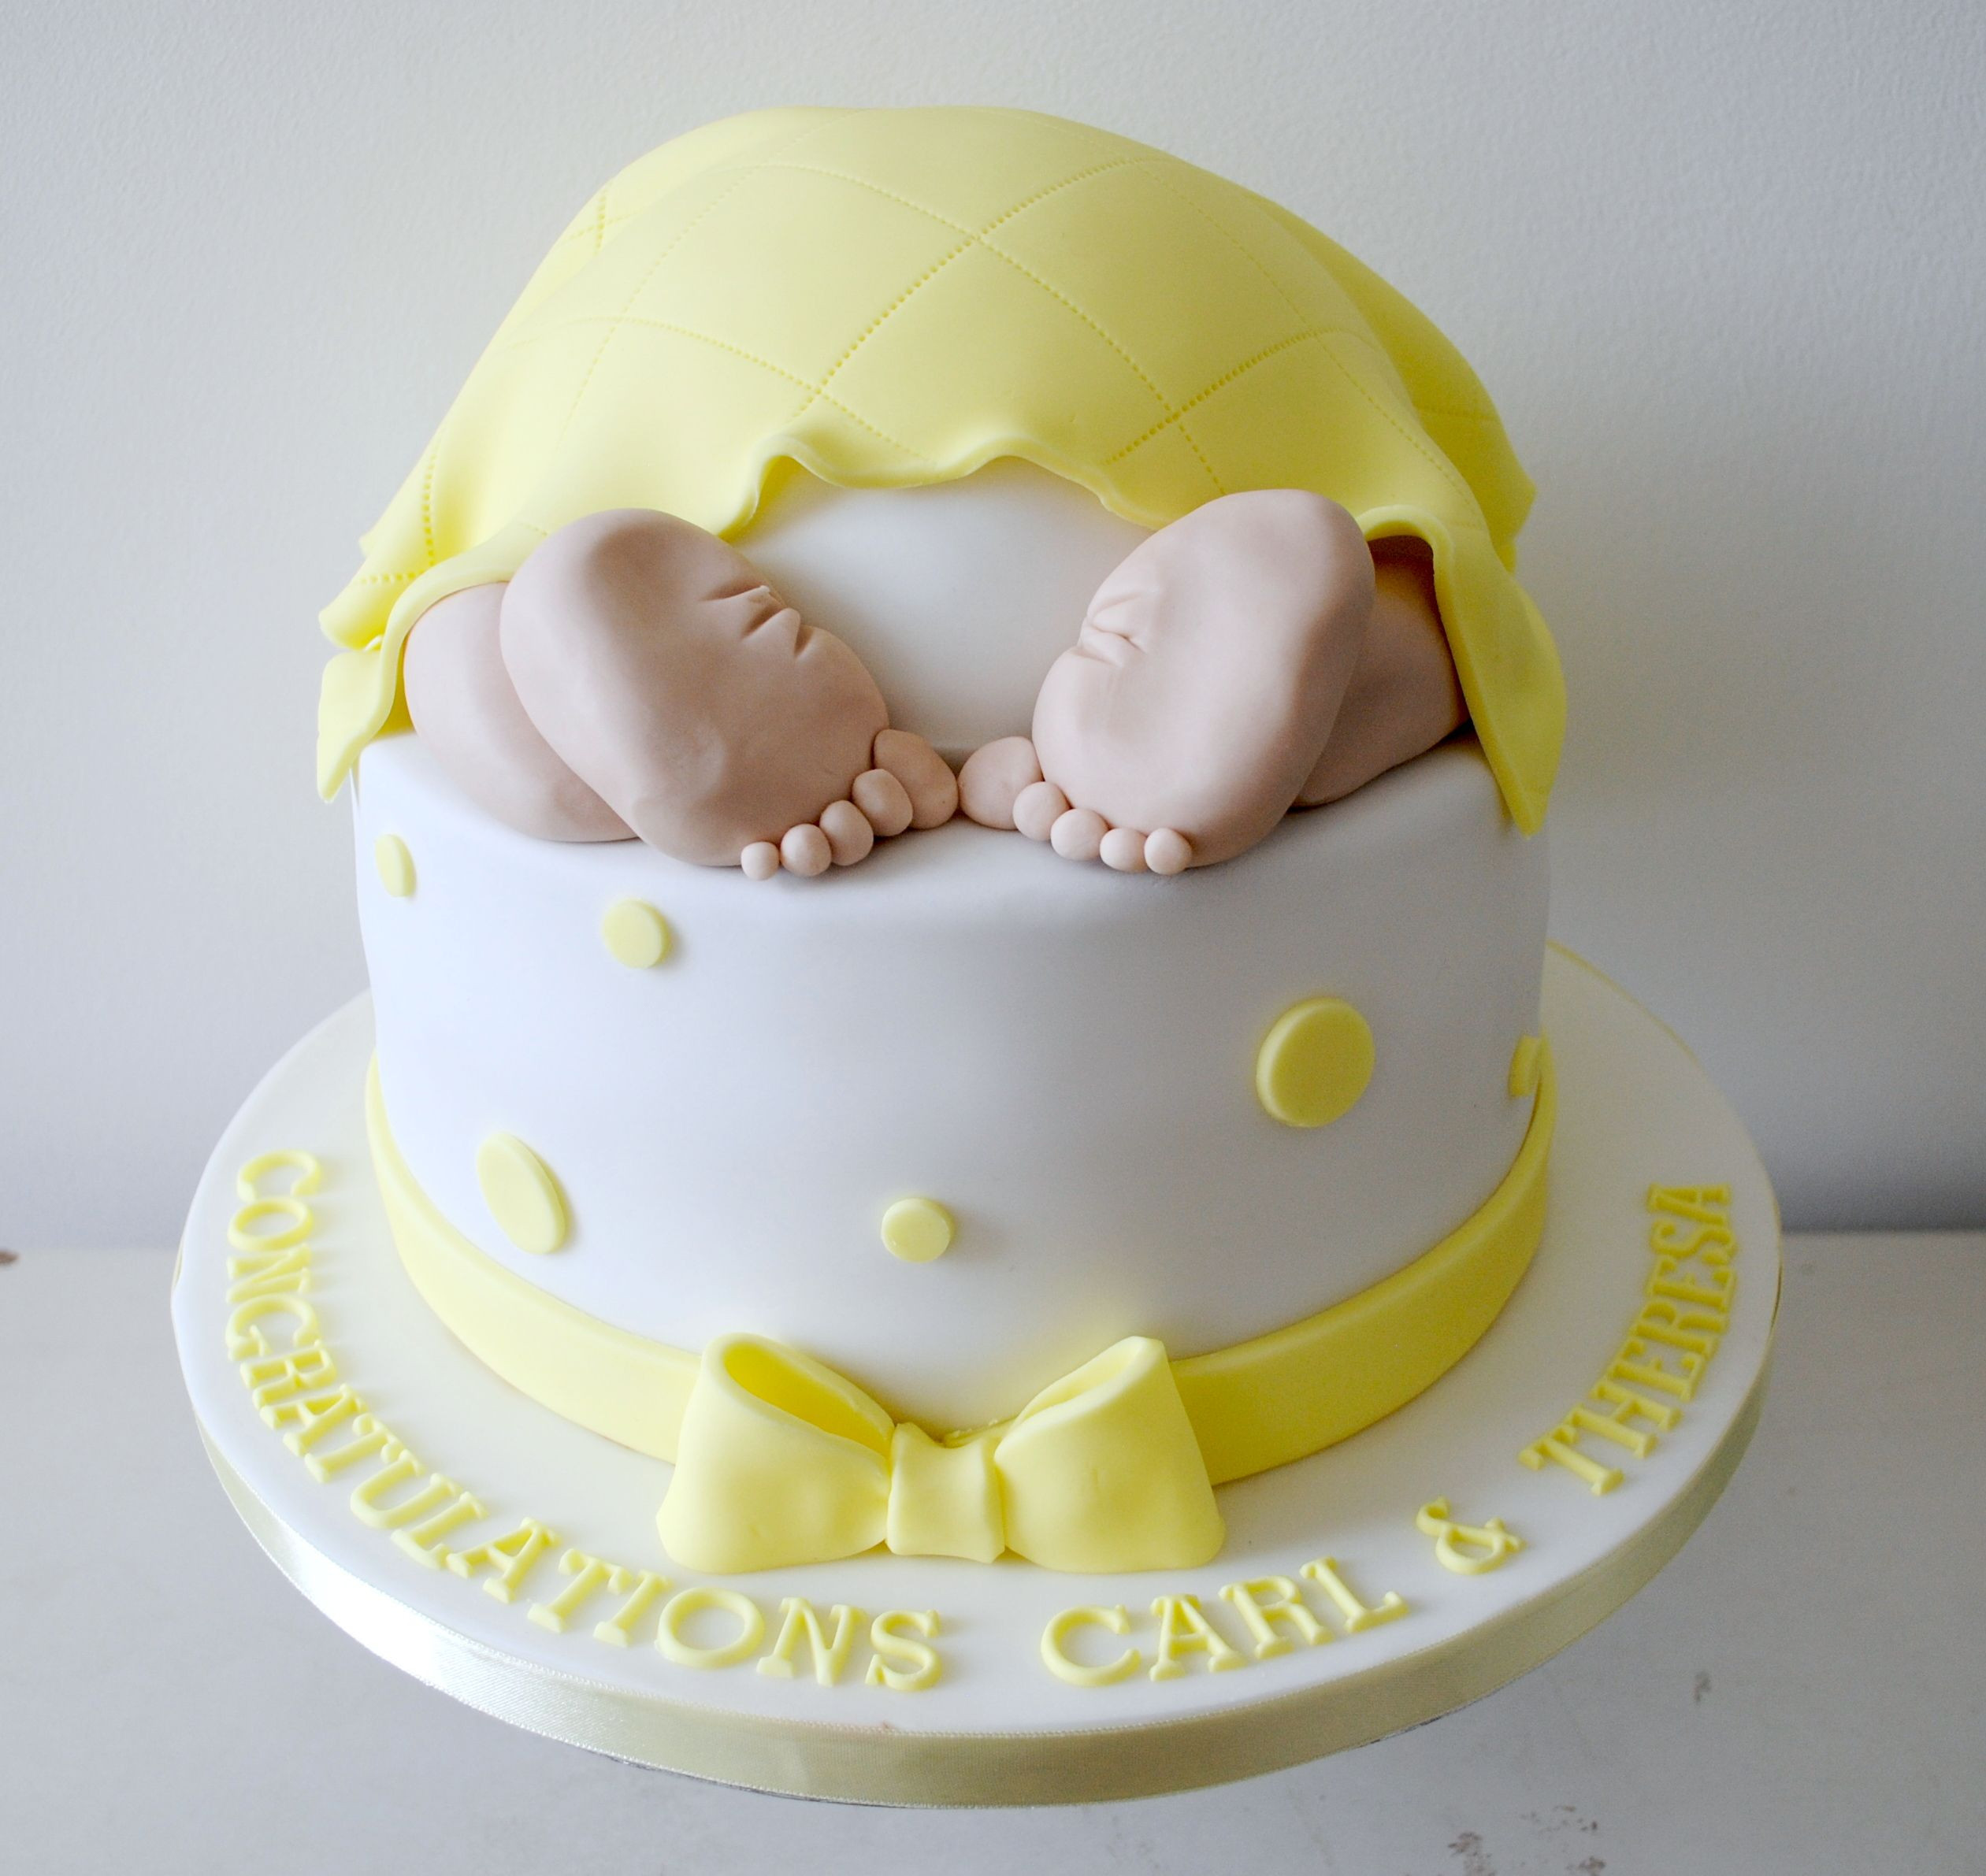 Baby Shower Cake Recipe
 What a cute little baby shower cake